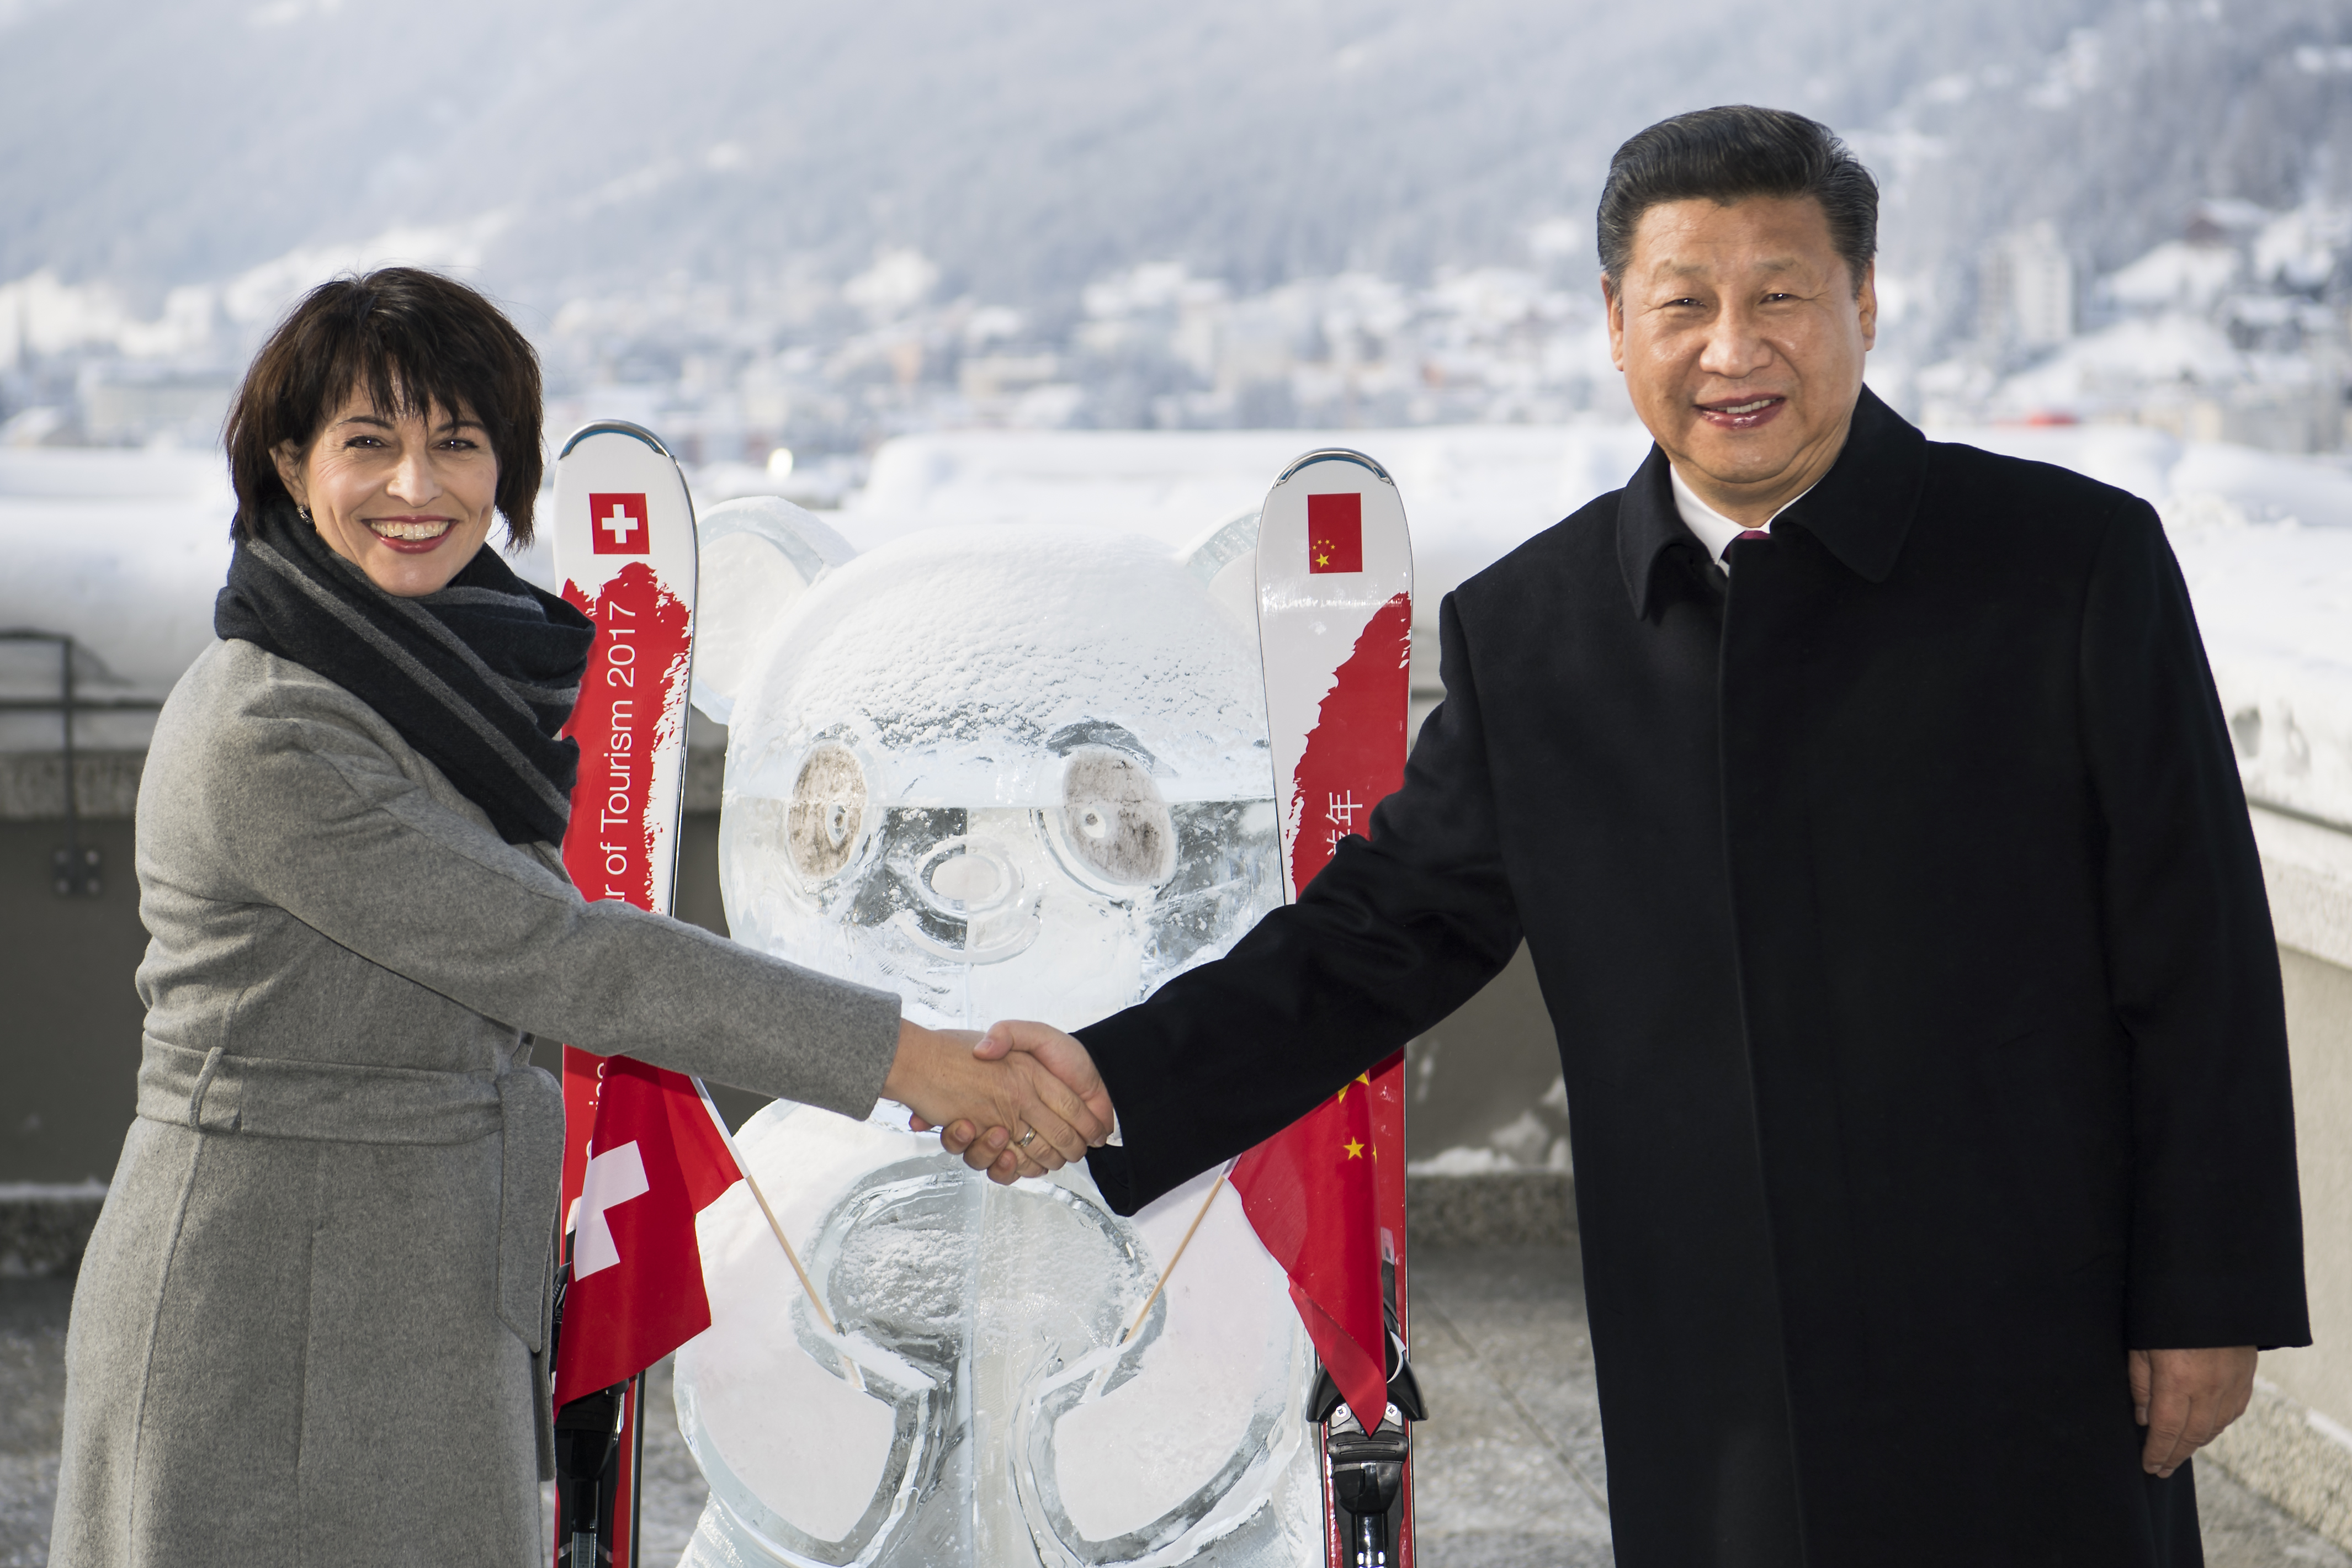 Swiss Federal President Doris Leuthard, left, shakes hands with China's President Xi Jinping, right, as they launch the Swiss-Sino year of tourism next to a panda ice sculpture on the side line of the 47th annual meeting of the World Economic Forum, WEF, in Davos, Switzerland, Tuesday, Jan. 17, 2017. (Laurent Gillieron/pool photo via AP)